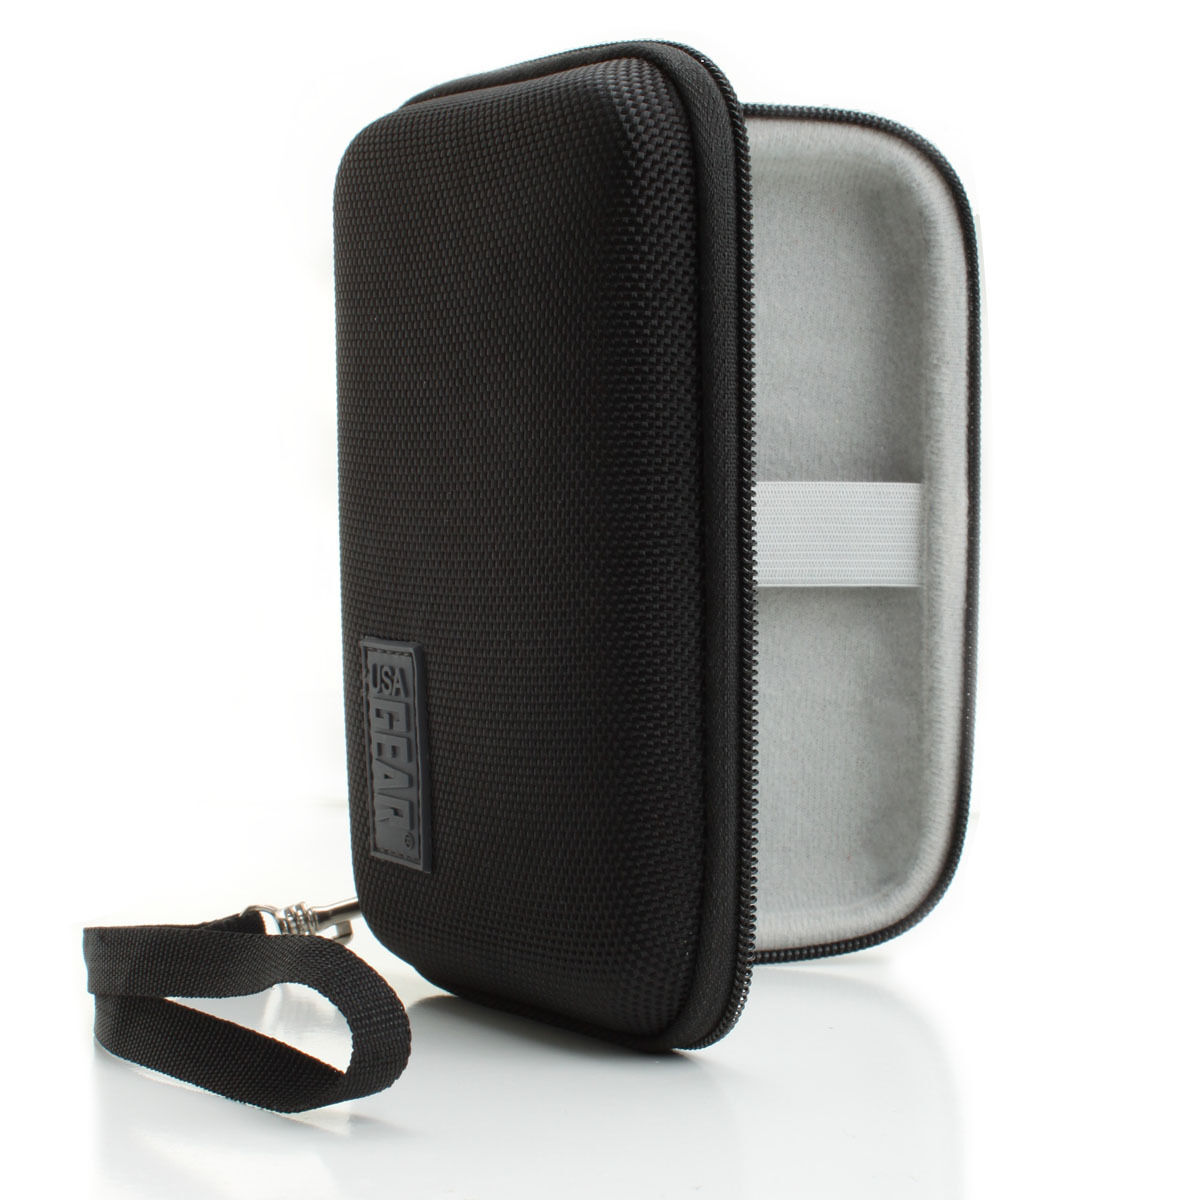 Protective Hard Shell Carrying Case